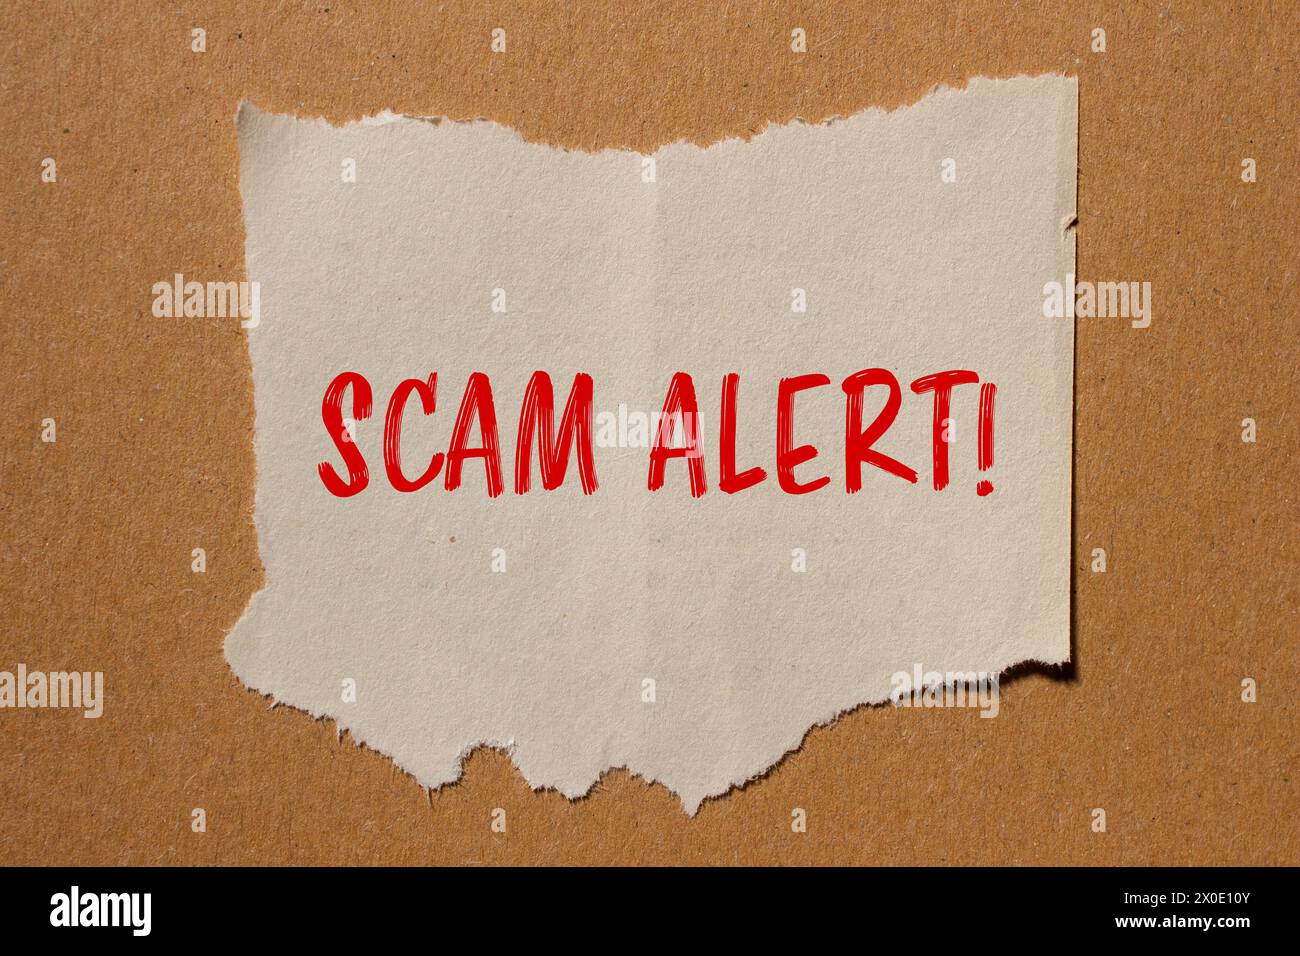 Scam alert words written on ripped paper with brown background. Conceptual symbol. Copy space. Stock Photo